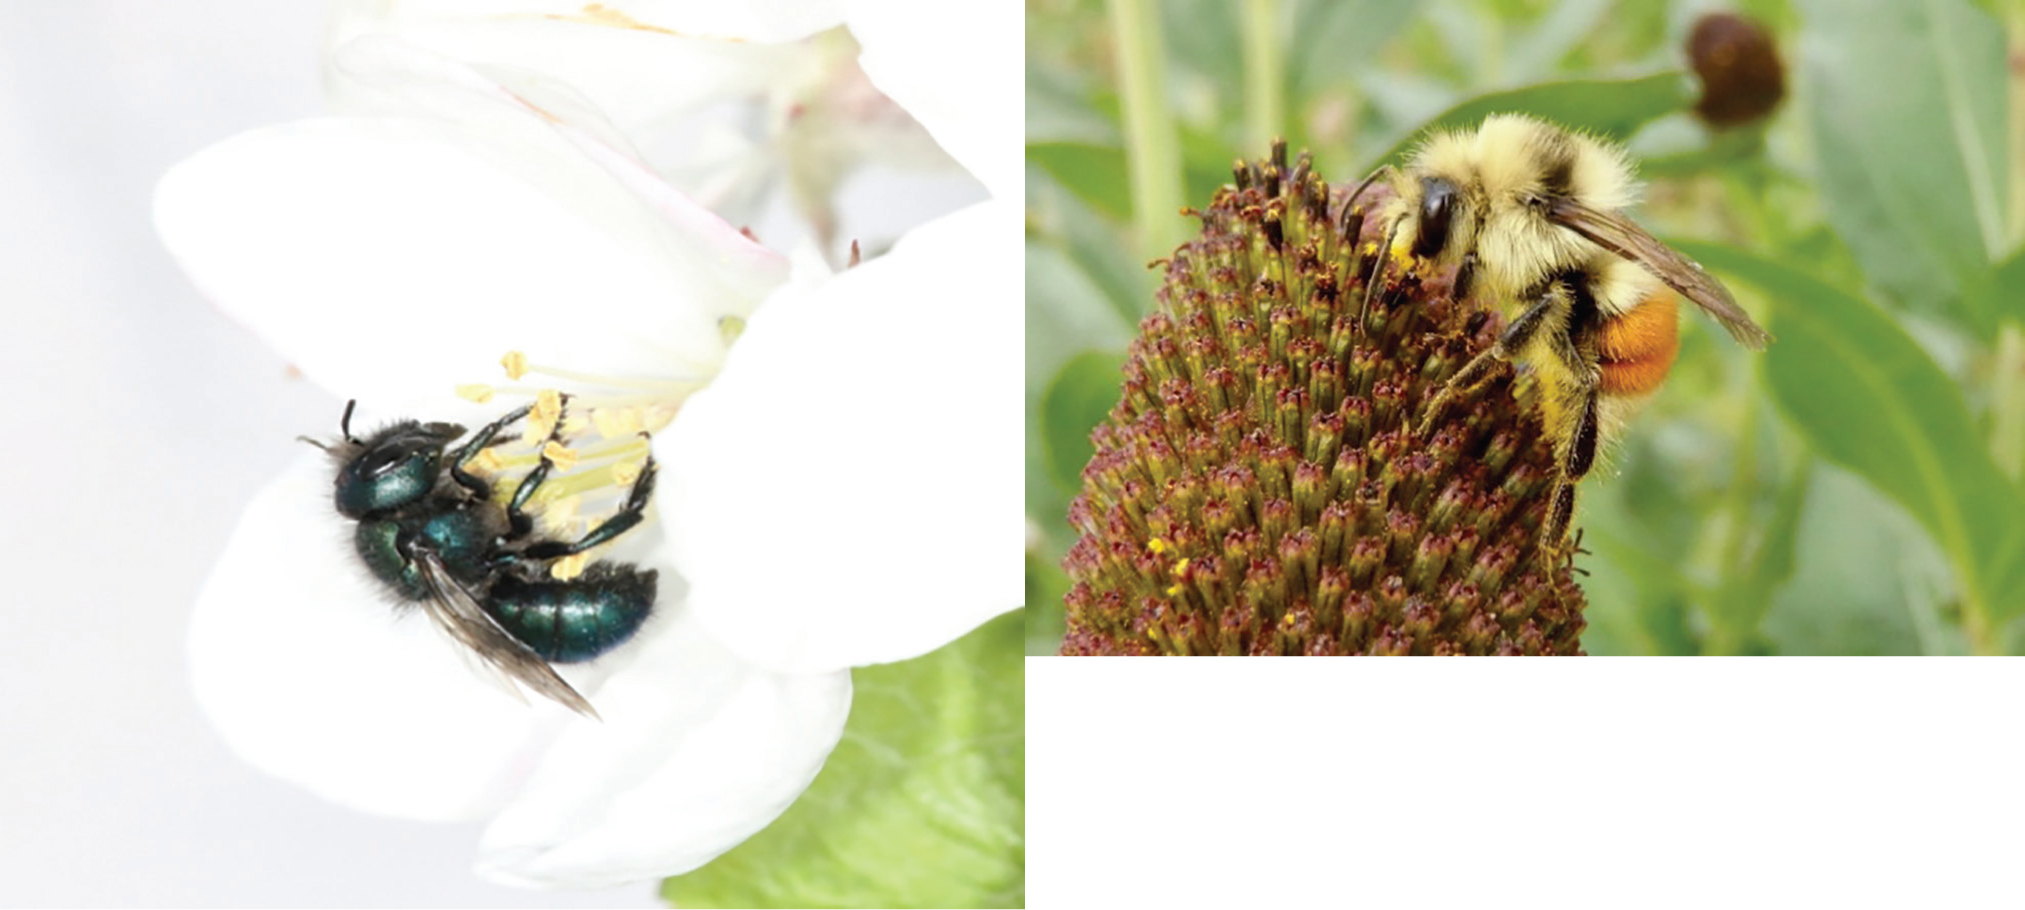 Left: Mason bee pollinating apple blossoms (photo courtesy of Joe Wilson). Right: Forest bumblebee (photo courtesy of Zack Miller].